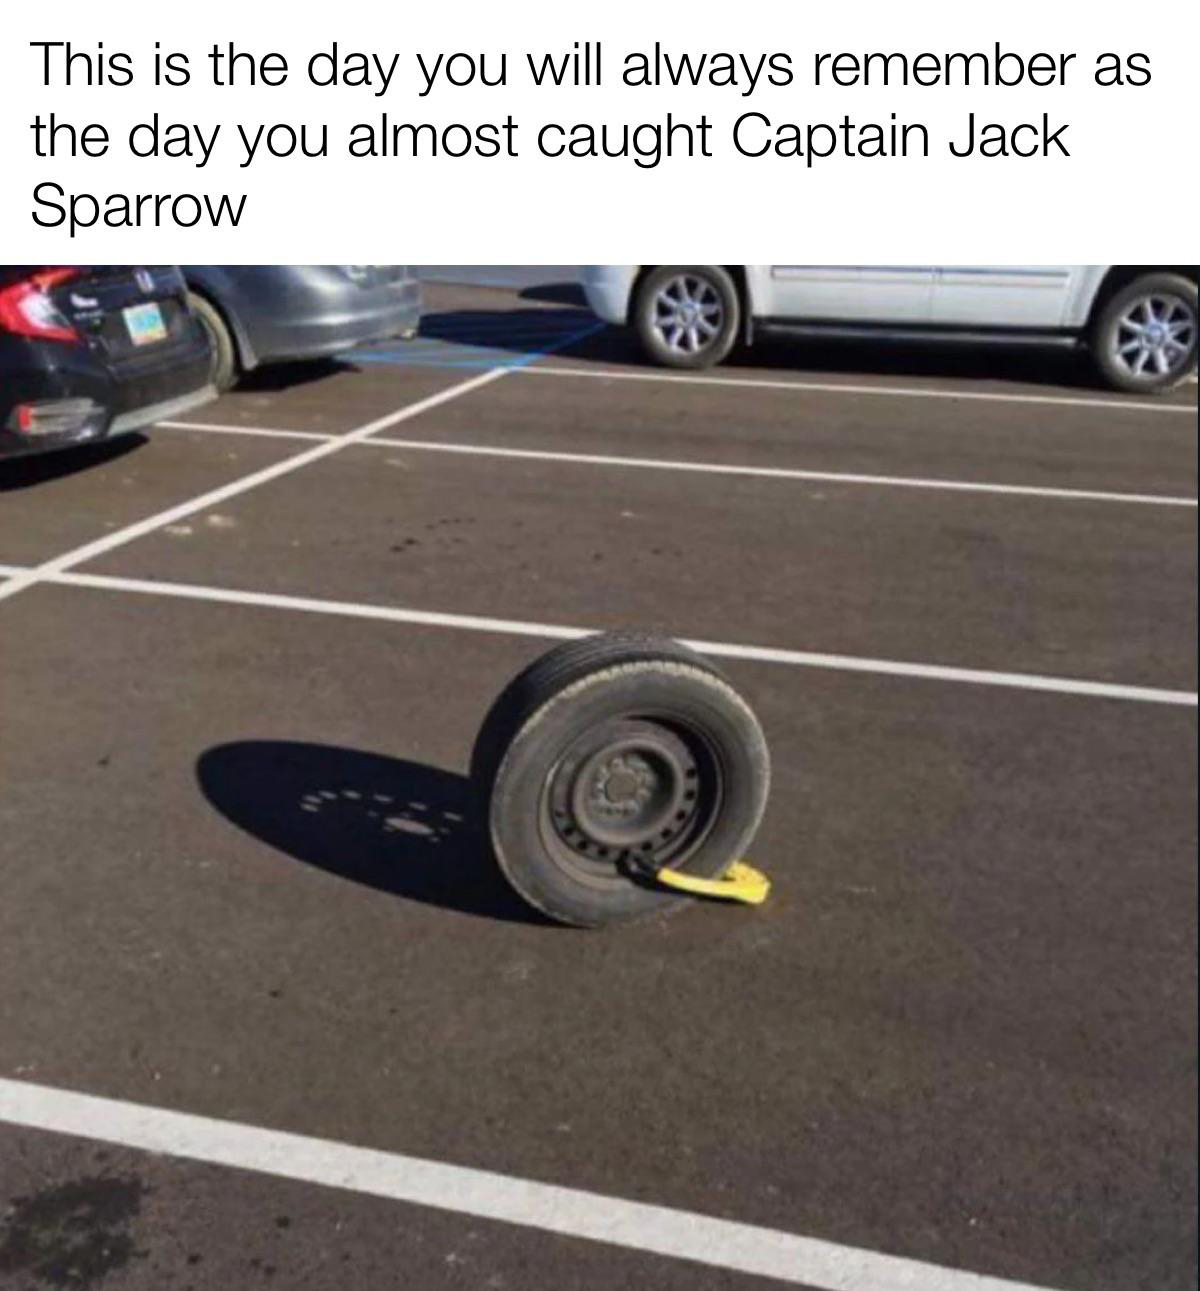 tire - This is the day you will always remember as the day you almost caught Captain Jack Sparrow